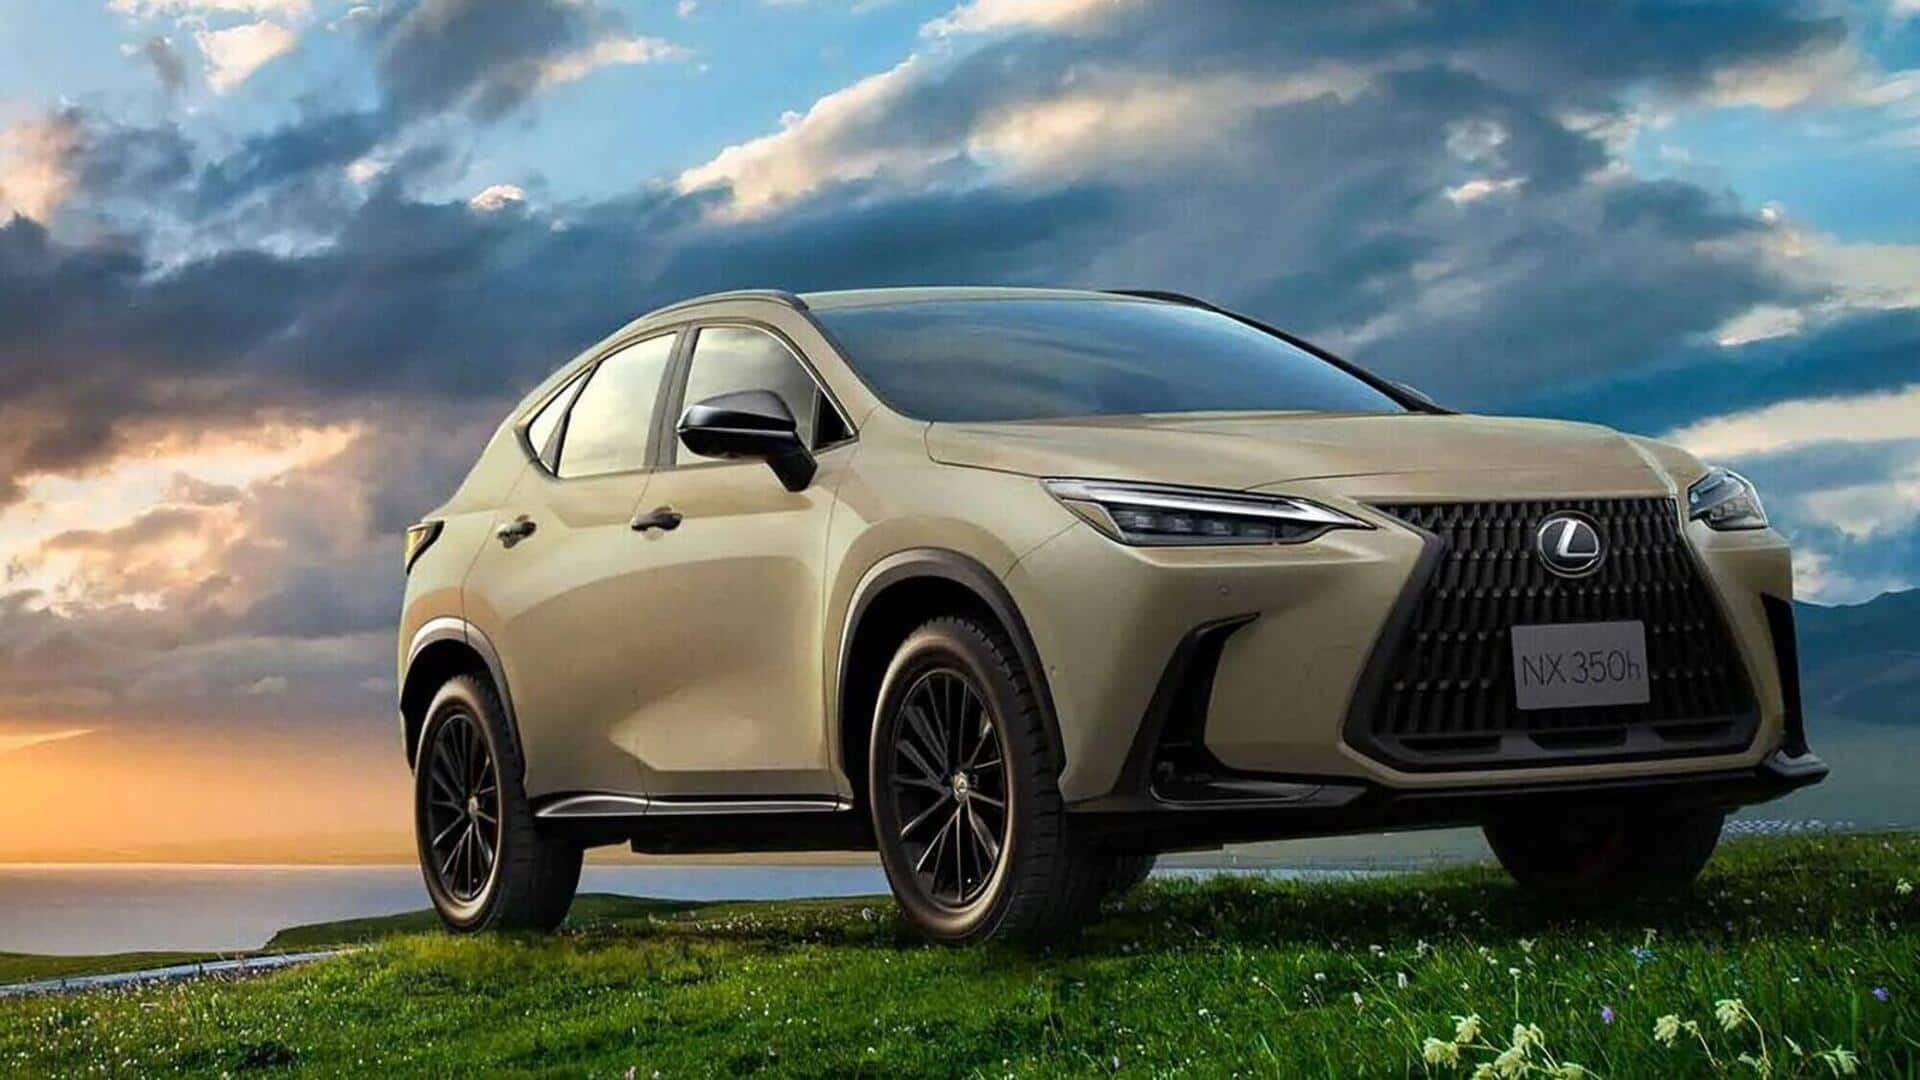 Lexus NX 350h Overtrail launched in India at ₹71.17 lakh